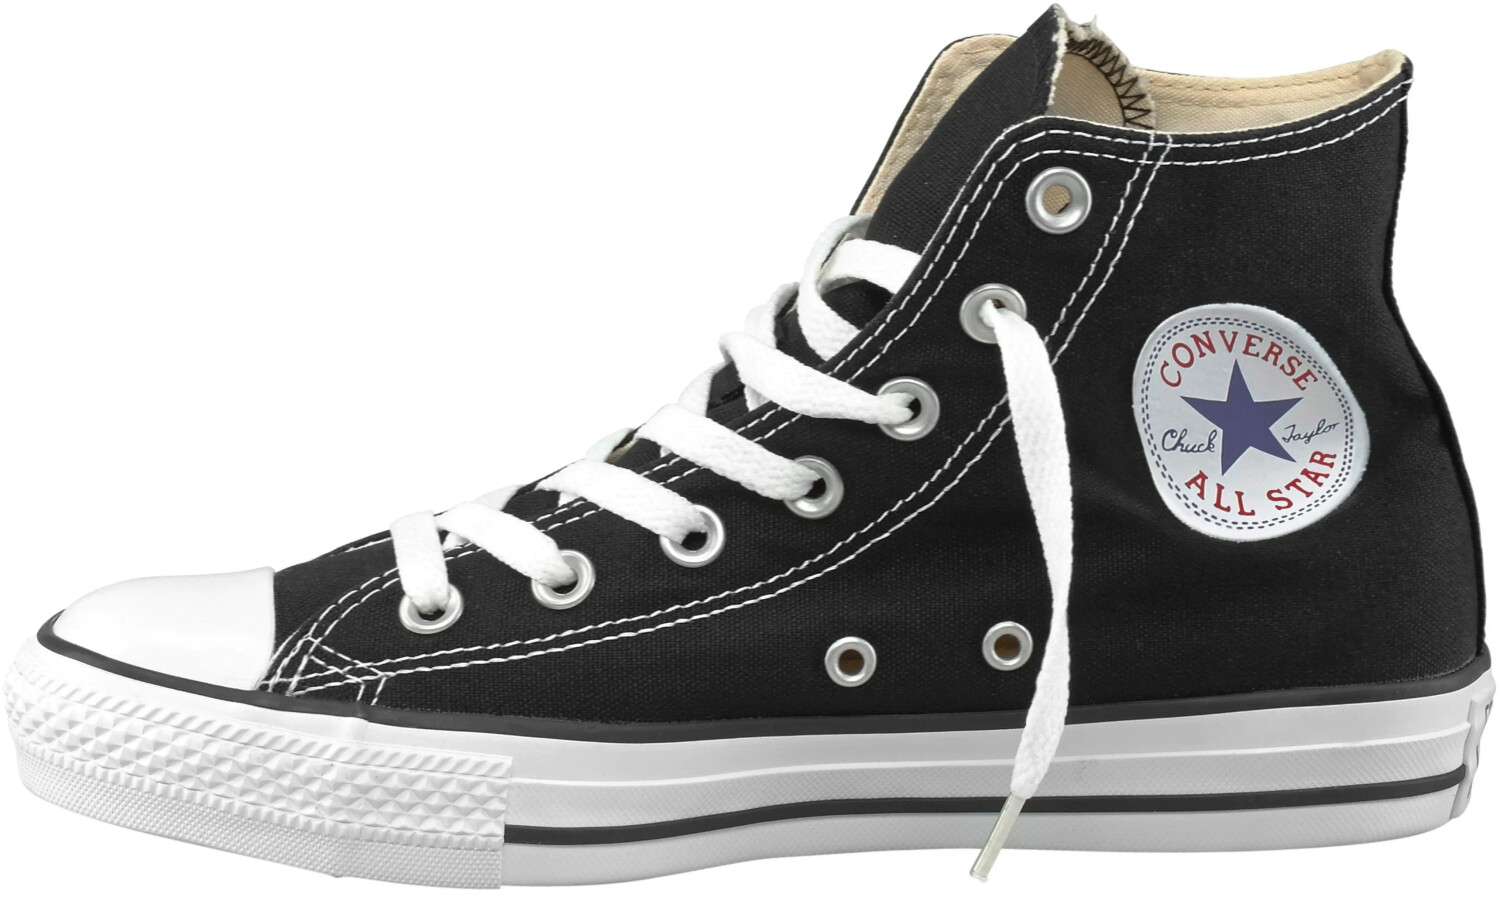 black and white converse sneakers